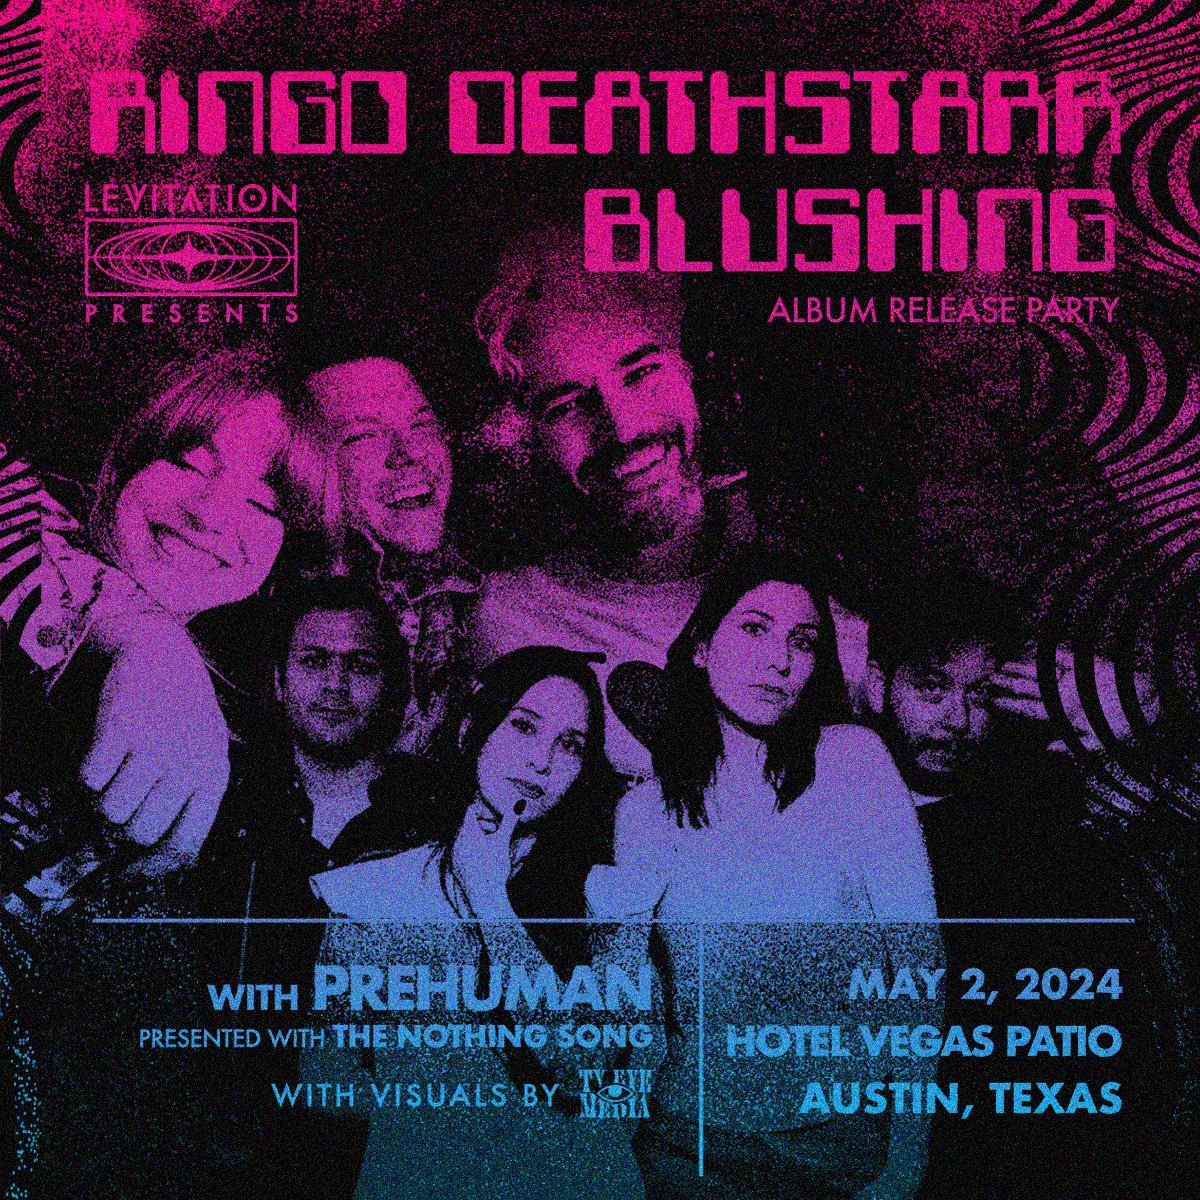 This Thursday at @HotelVegasATX! Shoegaze / dream pop double header with @RingoDeathstarr and @BlushingBand, who are celebrating the release of their excellent new LP. Don’t miss it! Tix >>> levitation.fm/shows/